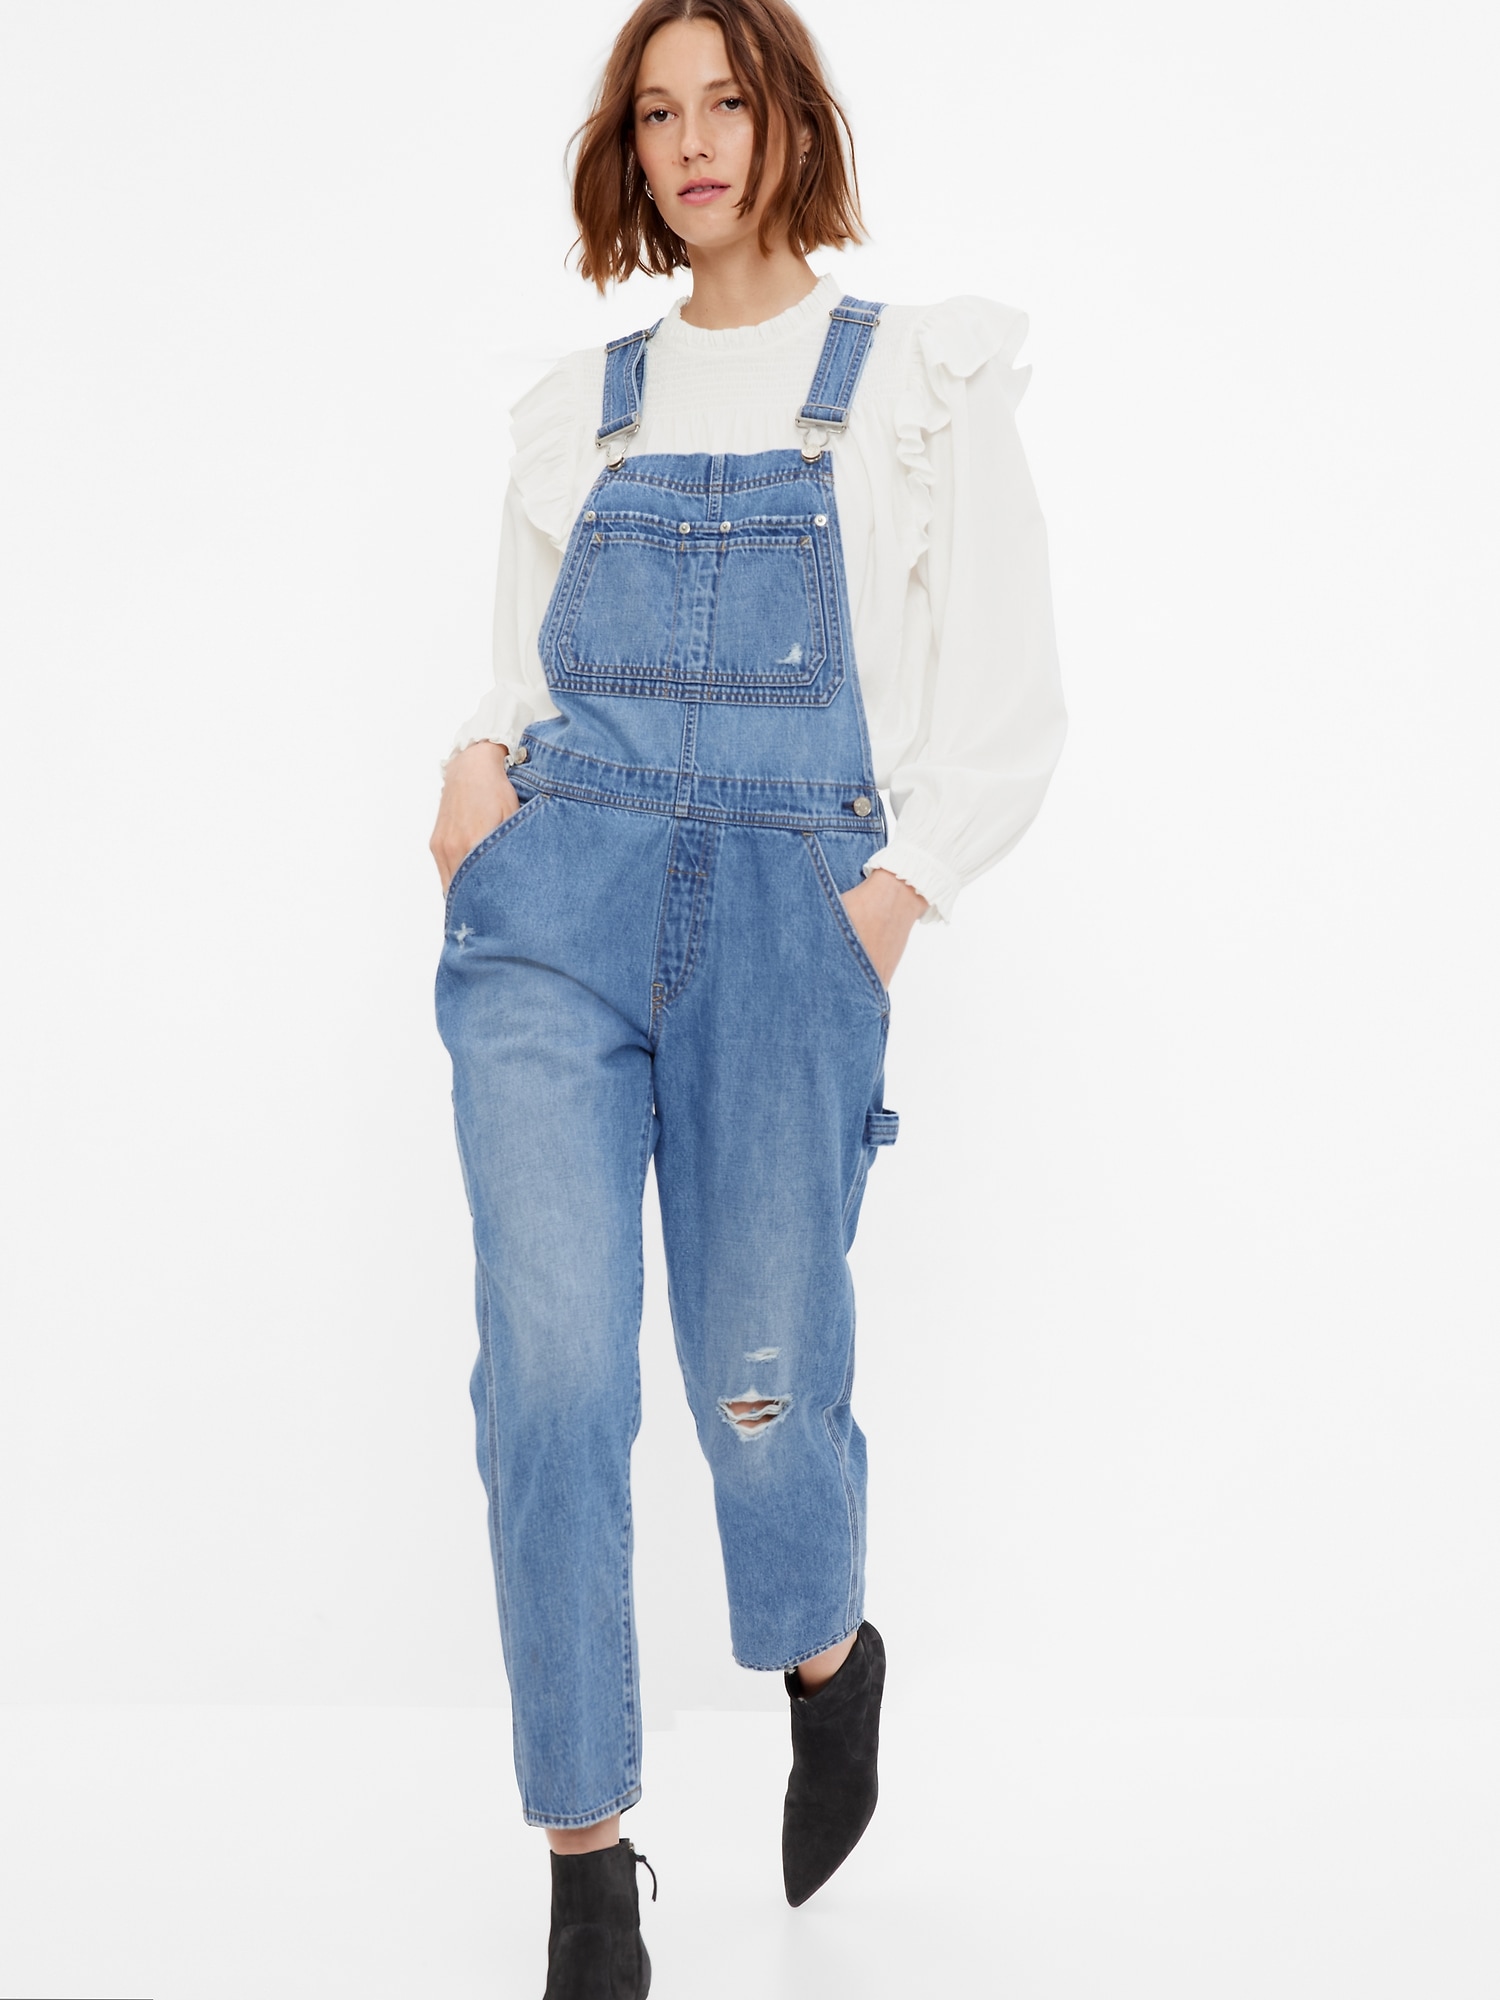 Just A Normal Girl Light Wash Distressed Straight Leg Denim Overalls – Pink  Lily